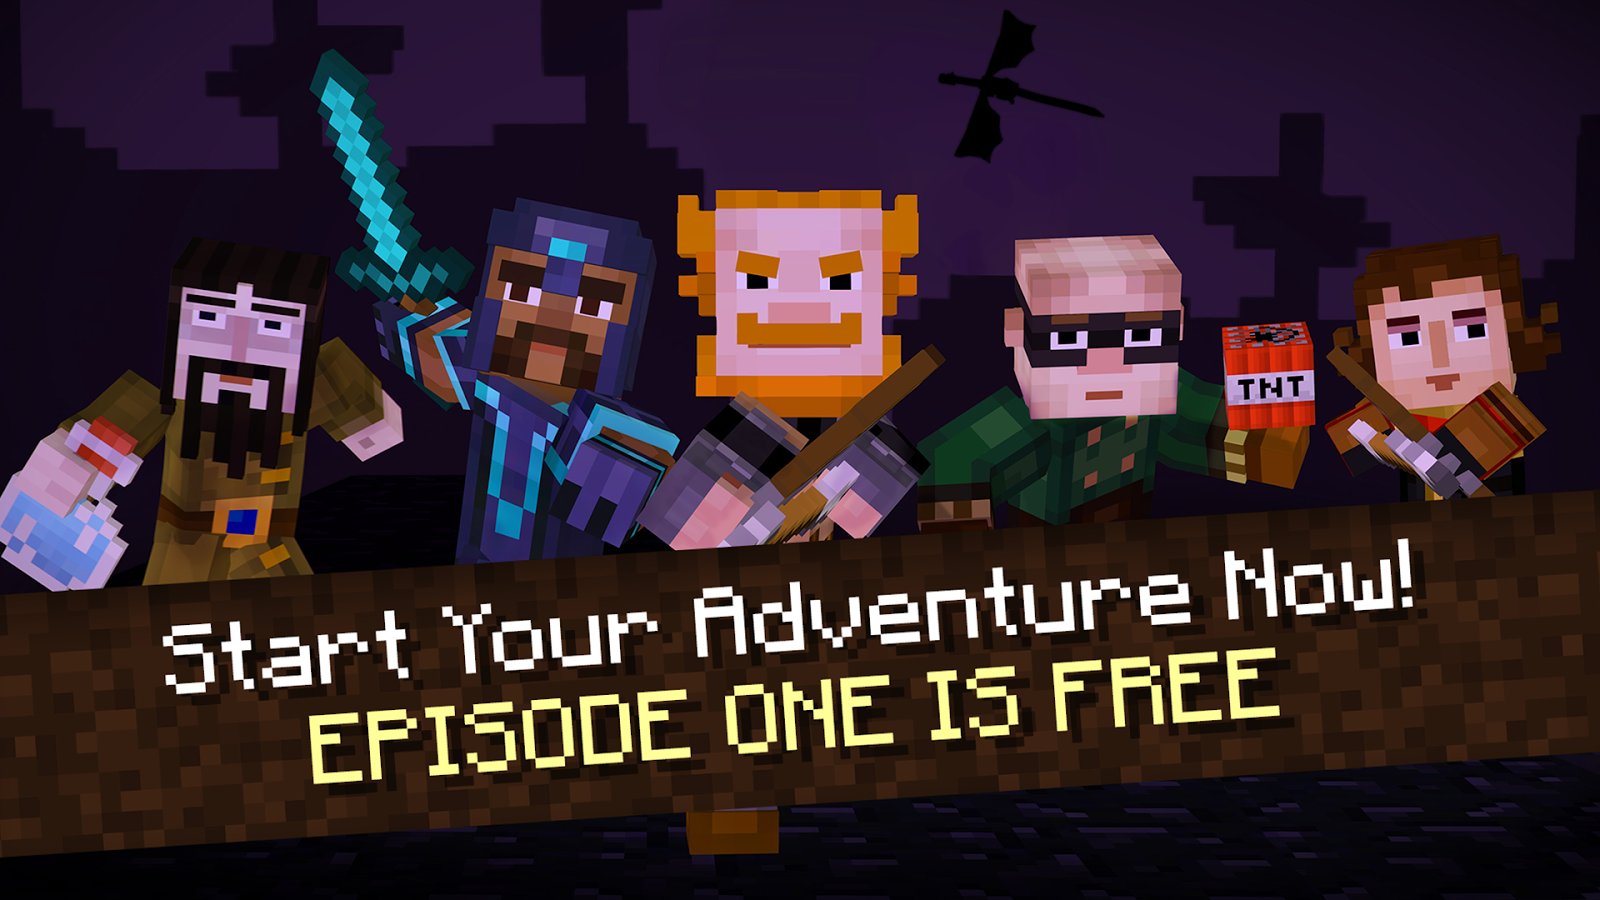 minecraft story mode download google play for mcpe